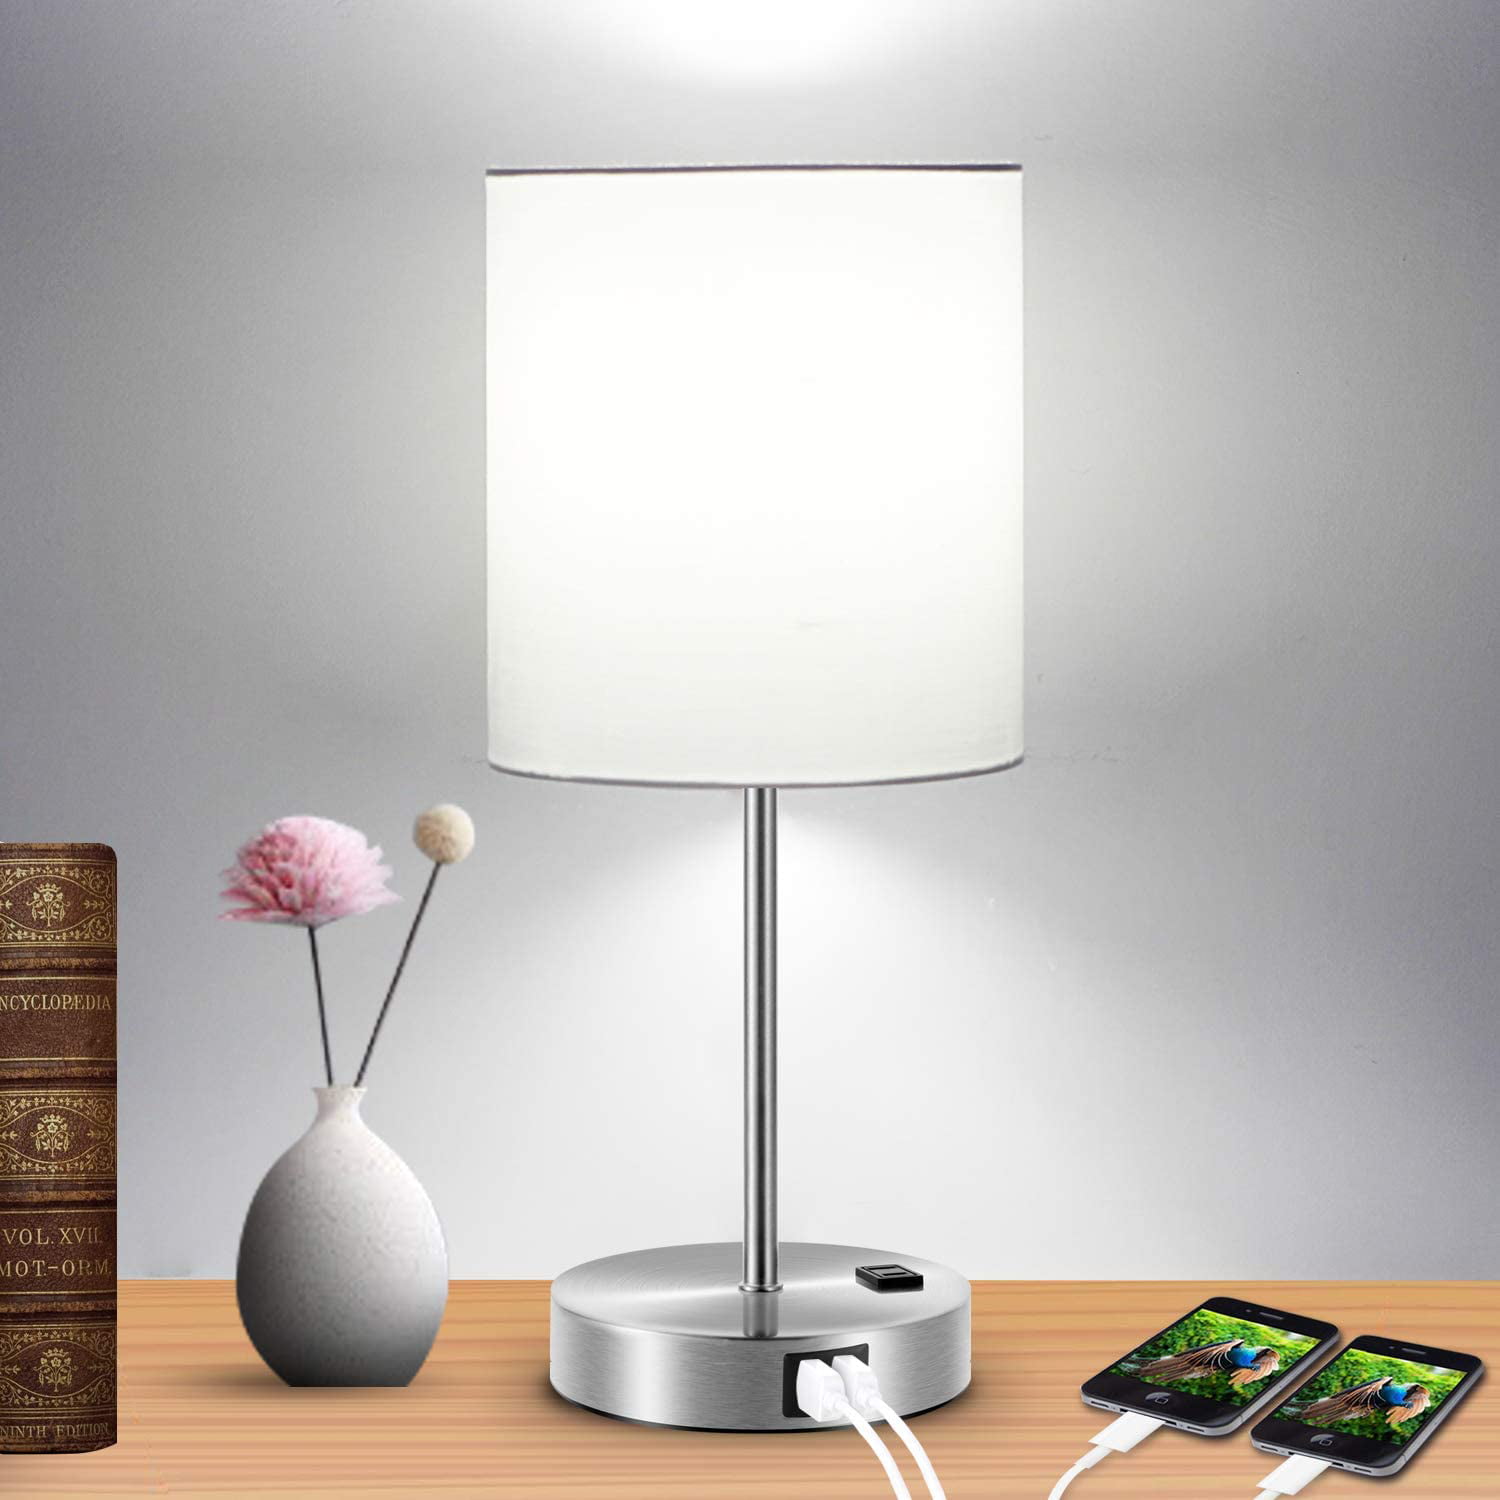 Touch Control Table Lamp 3 Way, Touch Control Bedside Lamp With 2 Usb Ports